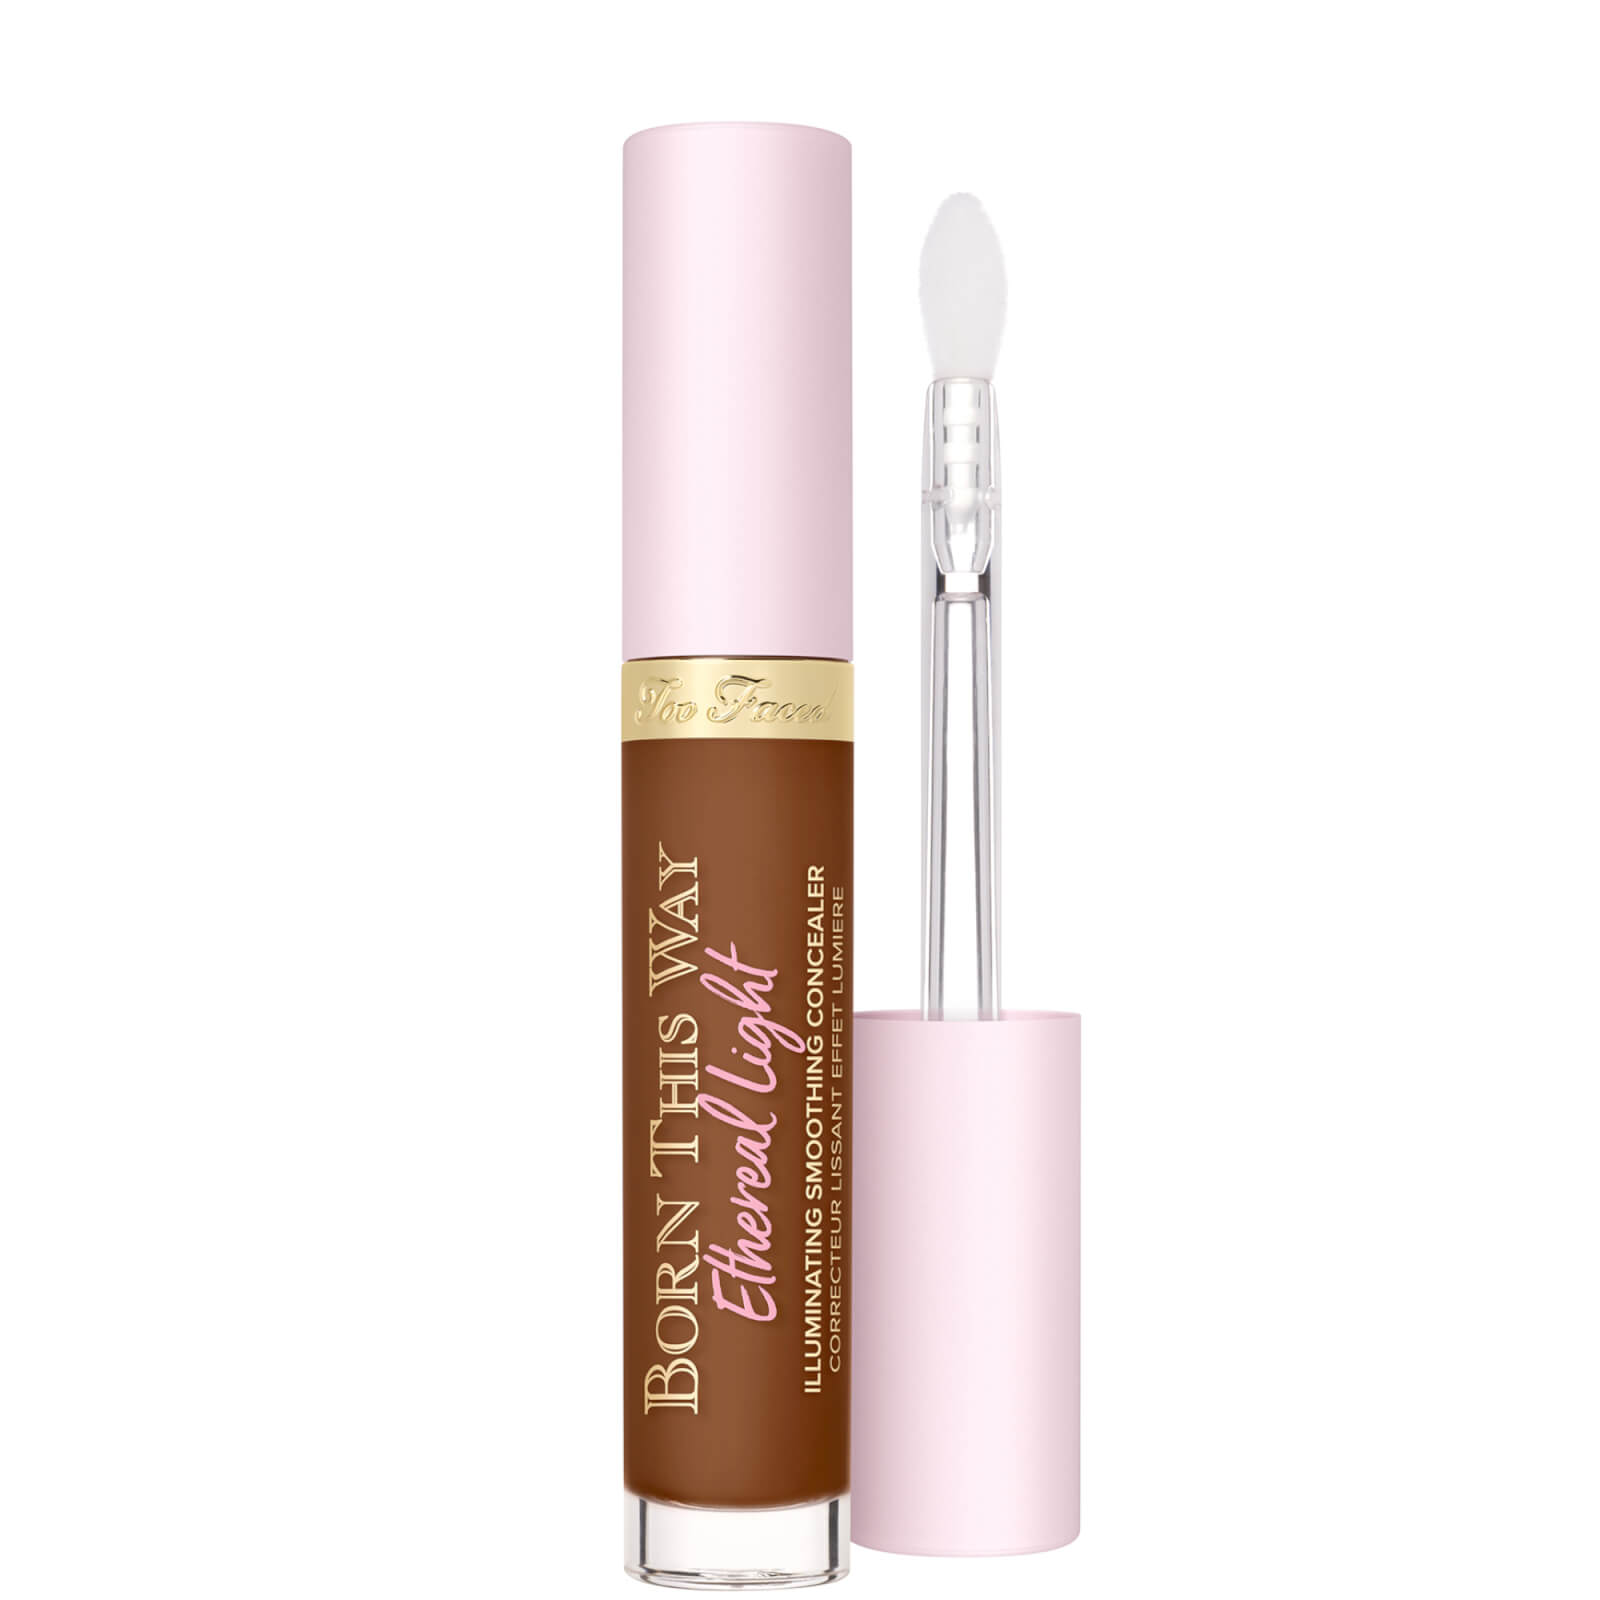 Too Faced Born This Way Ethereal Light Illuminating Smoothing Concealer 15ml (Various Shades) - Milk Chocolate